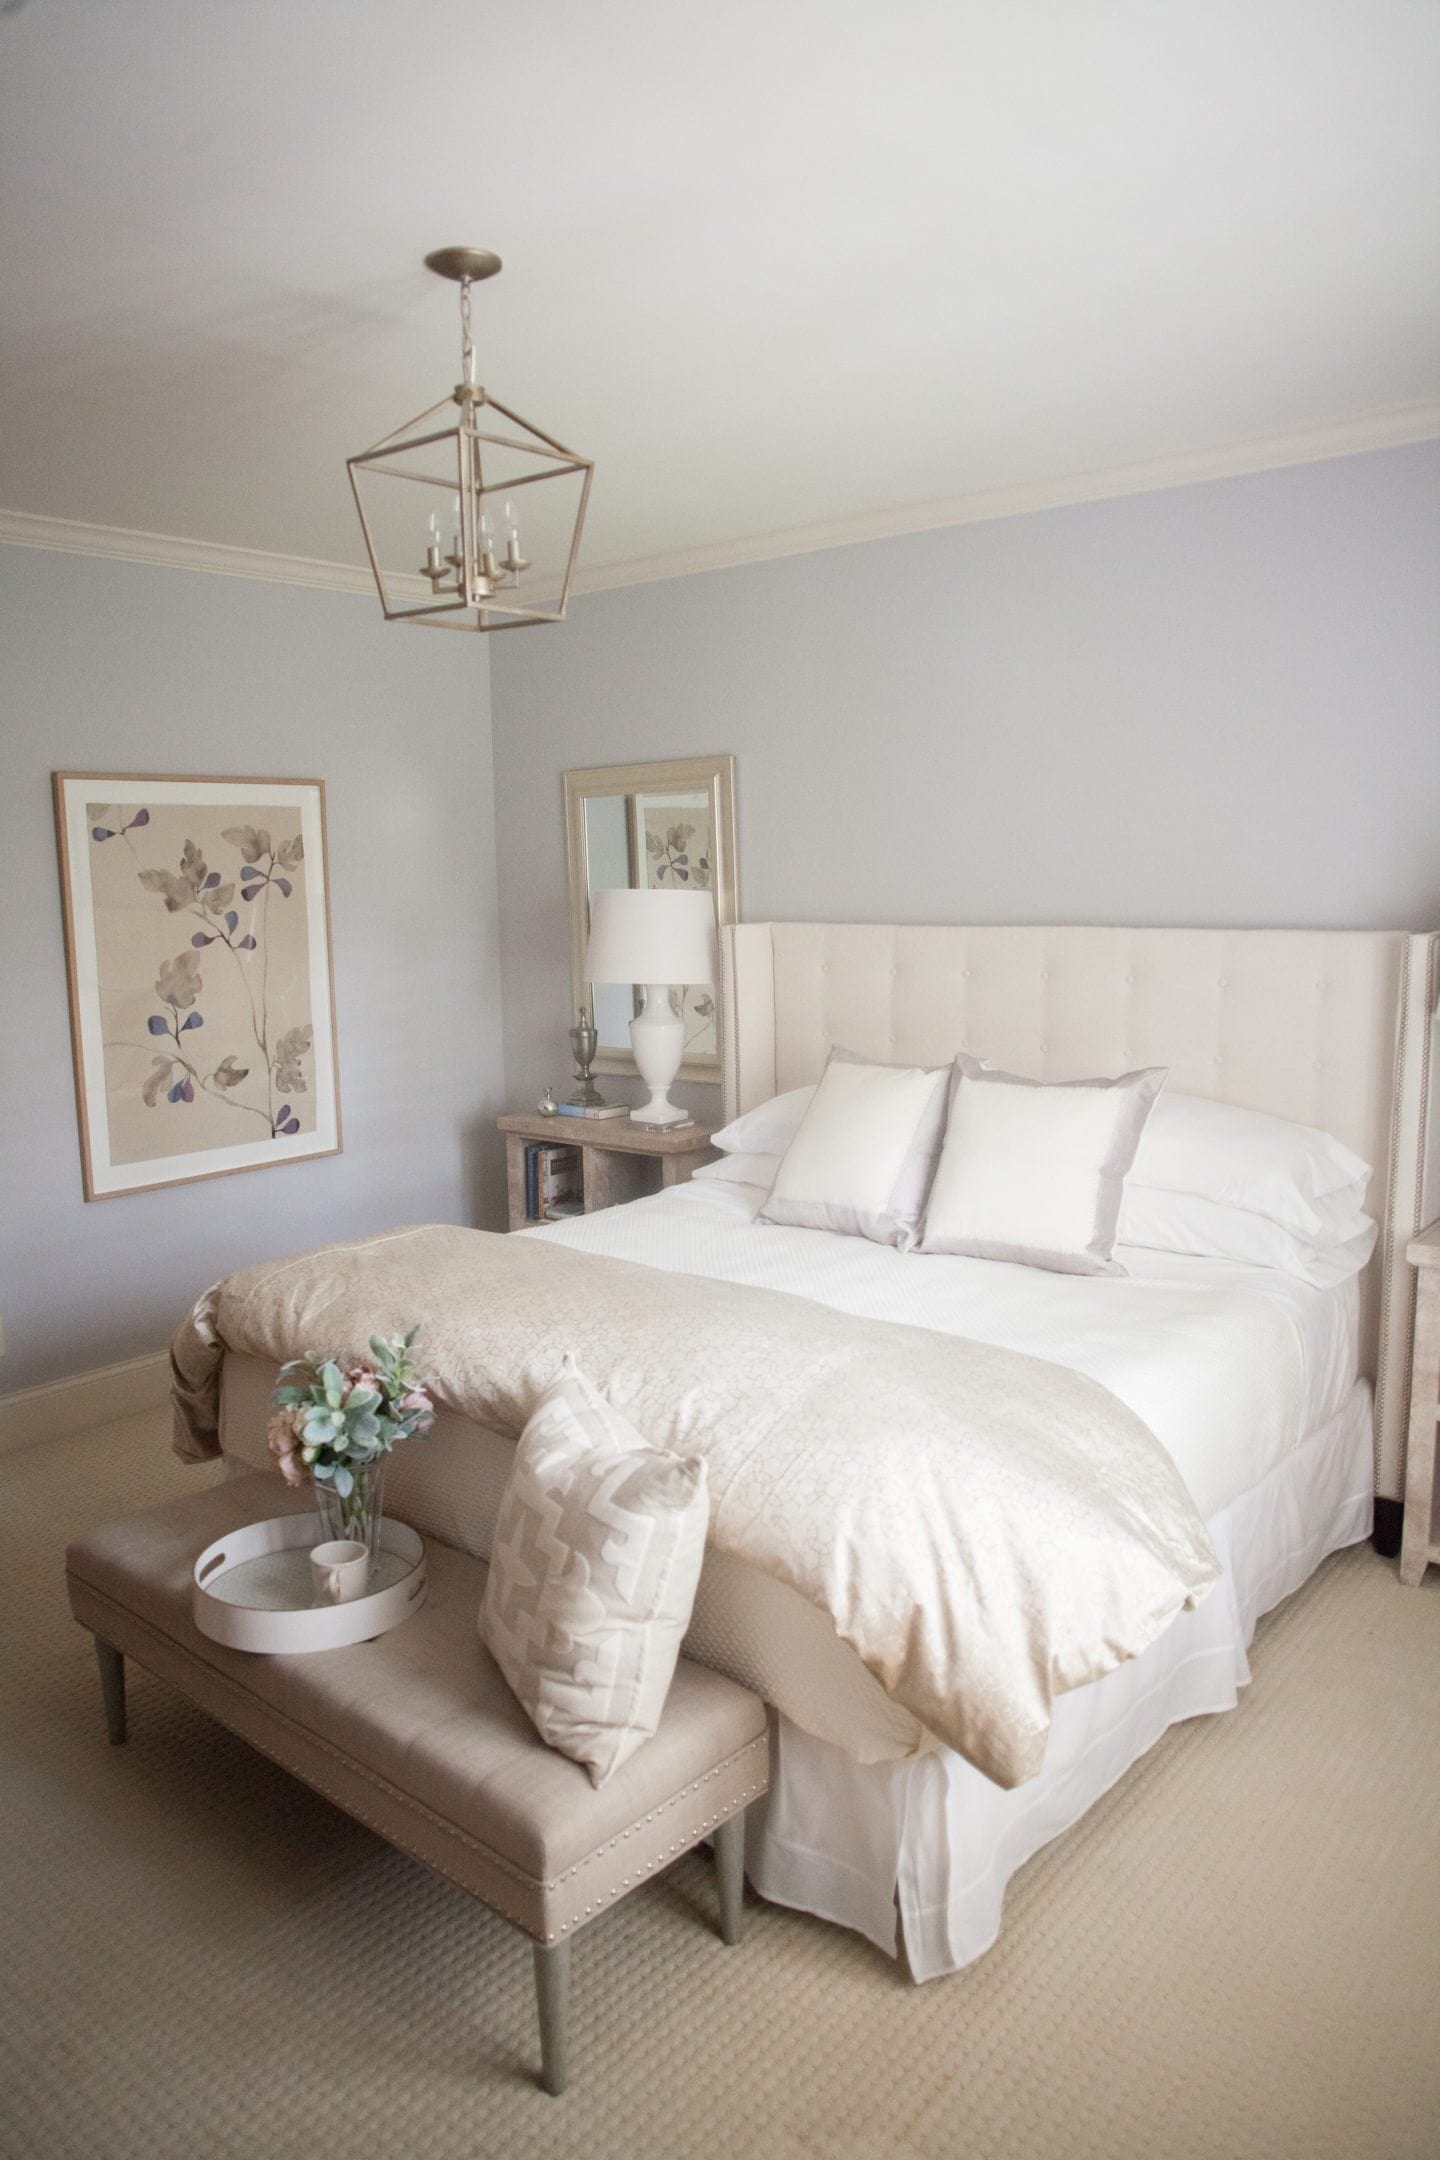 Bedroom decorated in ivory and pale lavender.